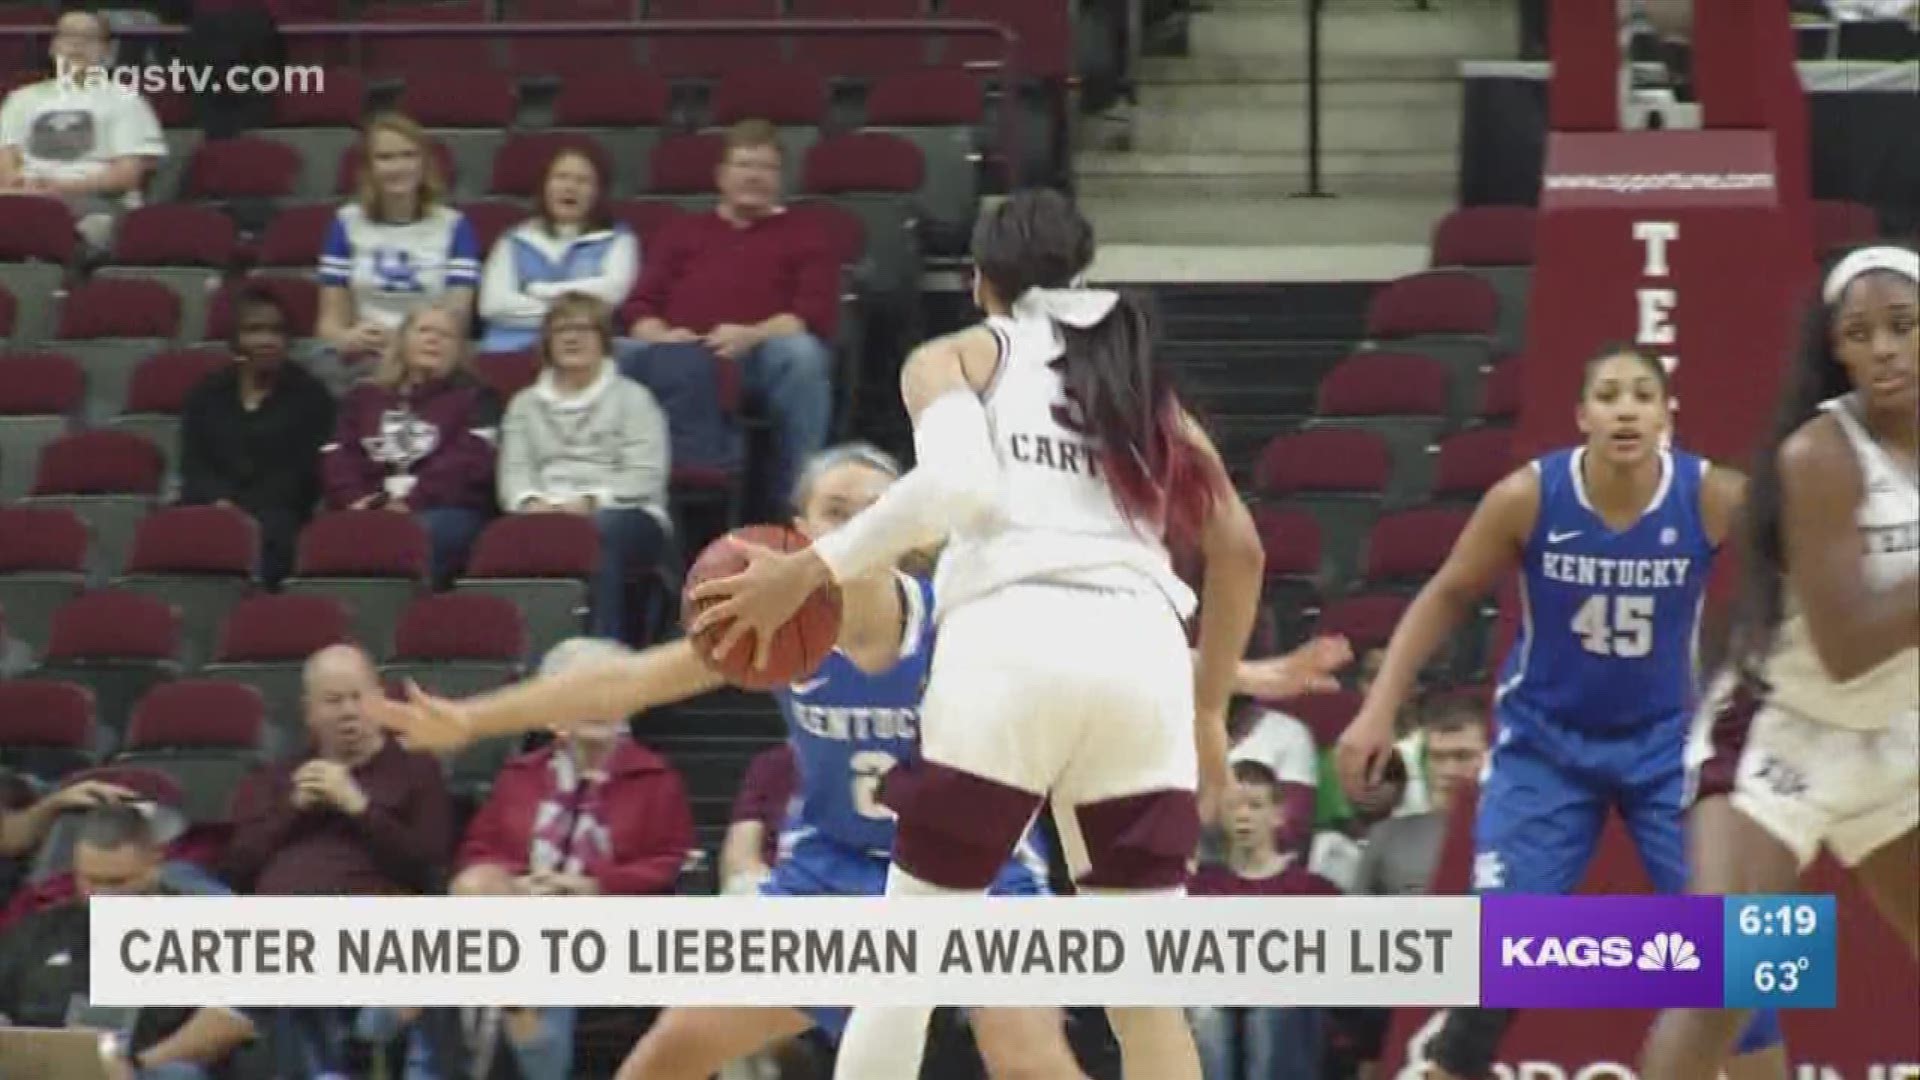 Texas A&M sophomore Chennedy Carter was named to the watch list for the 2019 Nancy Lieberman Award, presented by the Naismith Memorial Basketball Hall of Fame and the Women's Basketball Coaches' Association to the top point guard in women's college basket